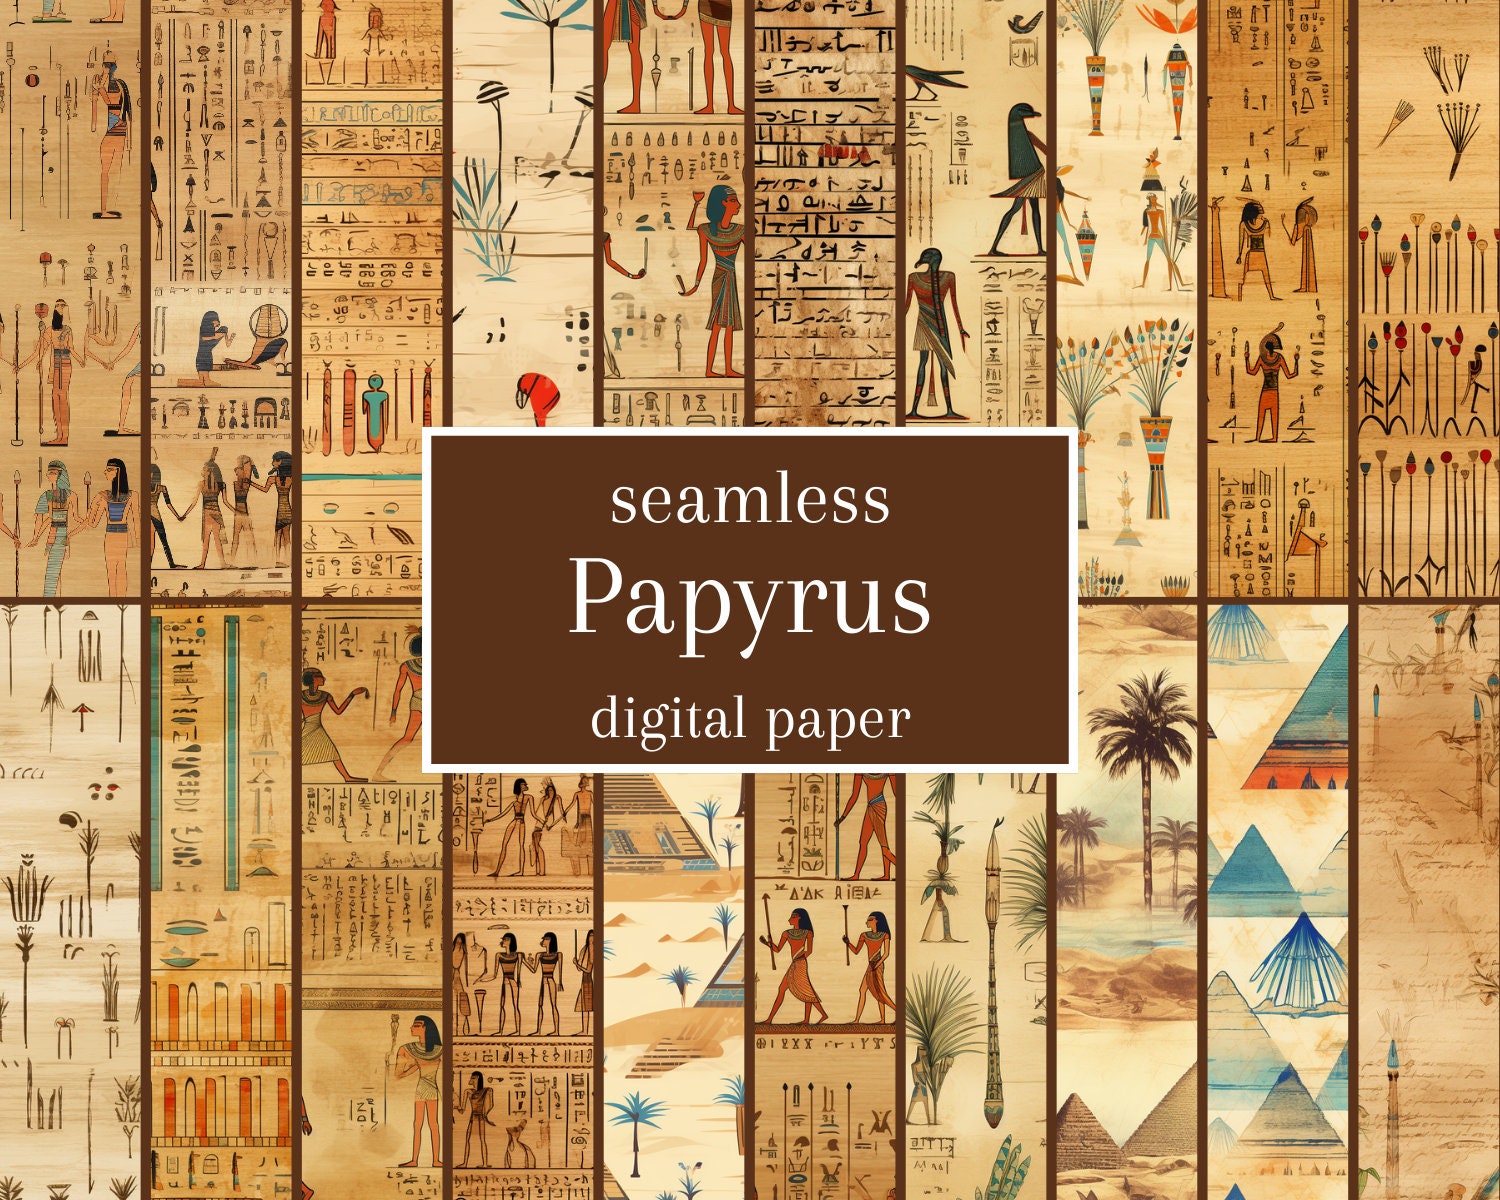 10 Papyrus Paper for printing light color A4 papyrus size 8.25x11.67  Print on Egyptian papyrus paper at home